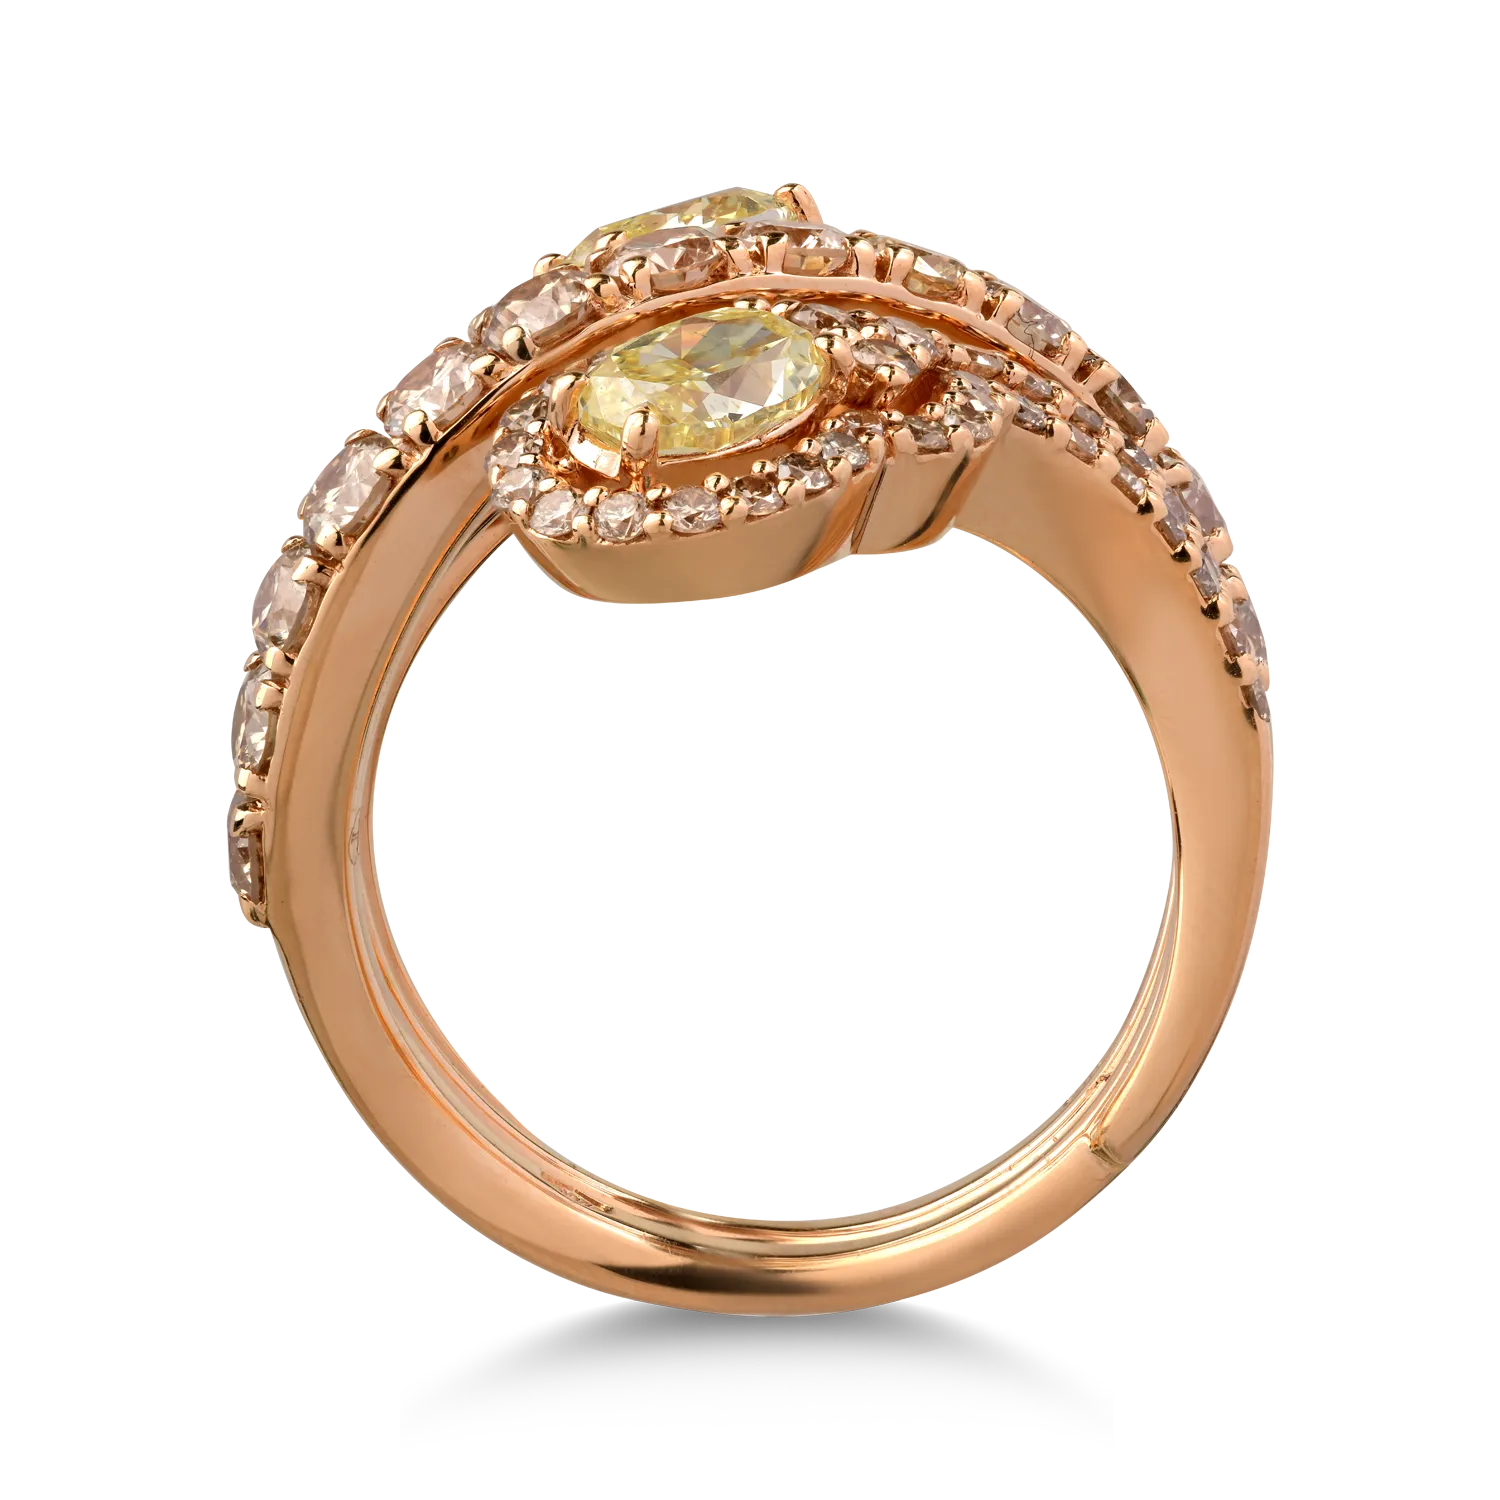 18K rose gold ring with 1.35ct yellow diamonds and 1.88ct brown diamonds